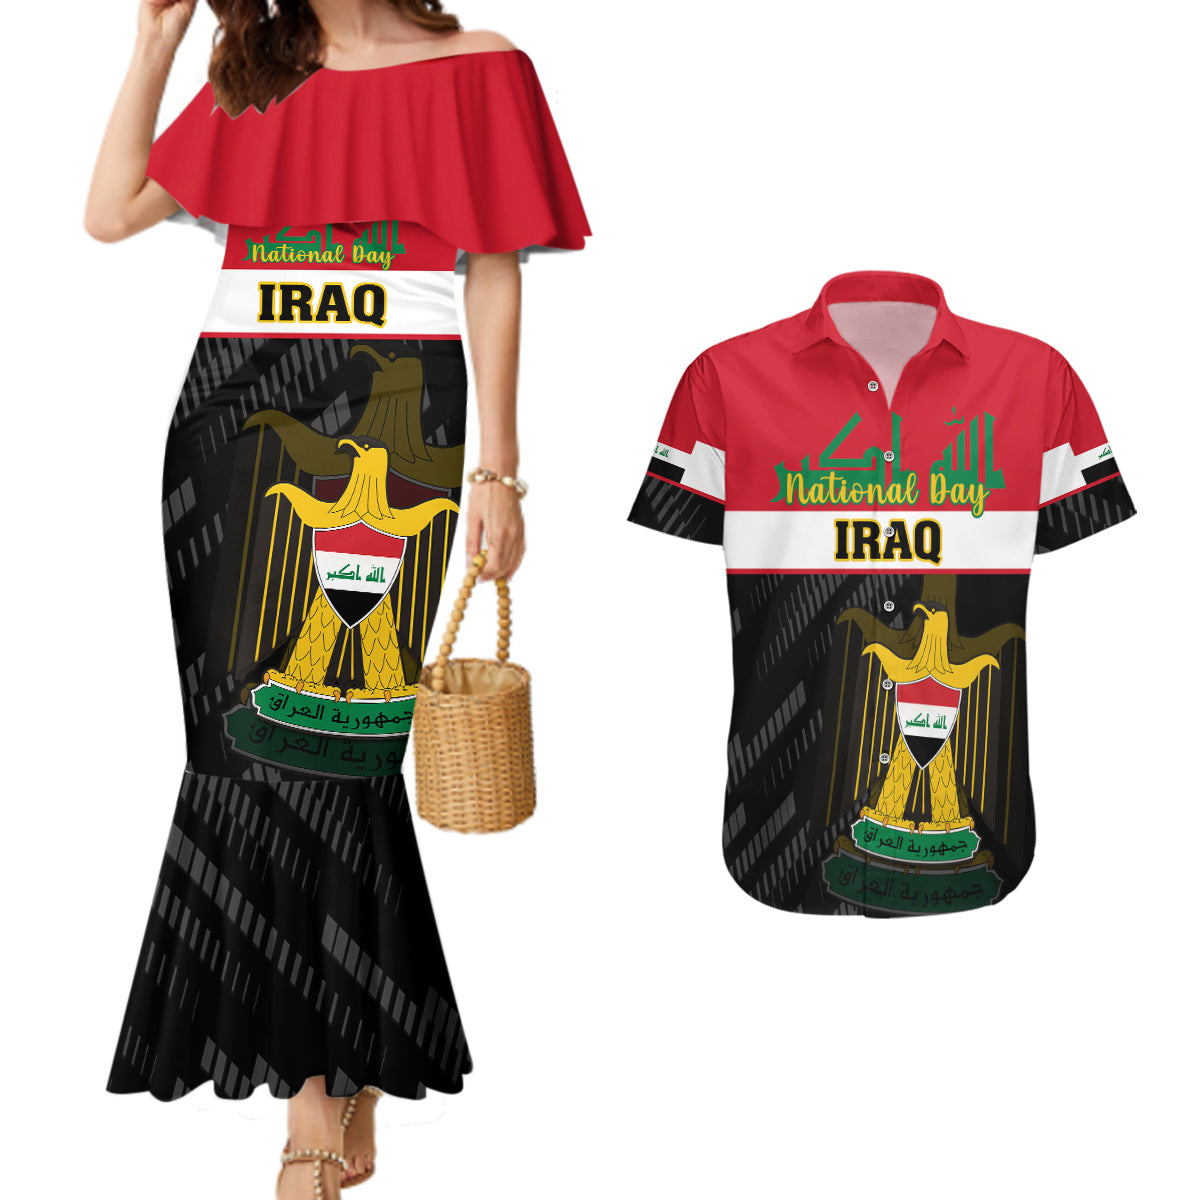 iraq-national-day-couples-matching-mermaid-dress-and-hawaiian-shirt-iraqi-coat-of-arms-with-flag-style